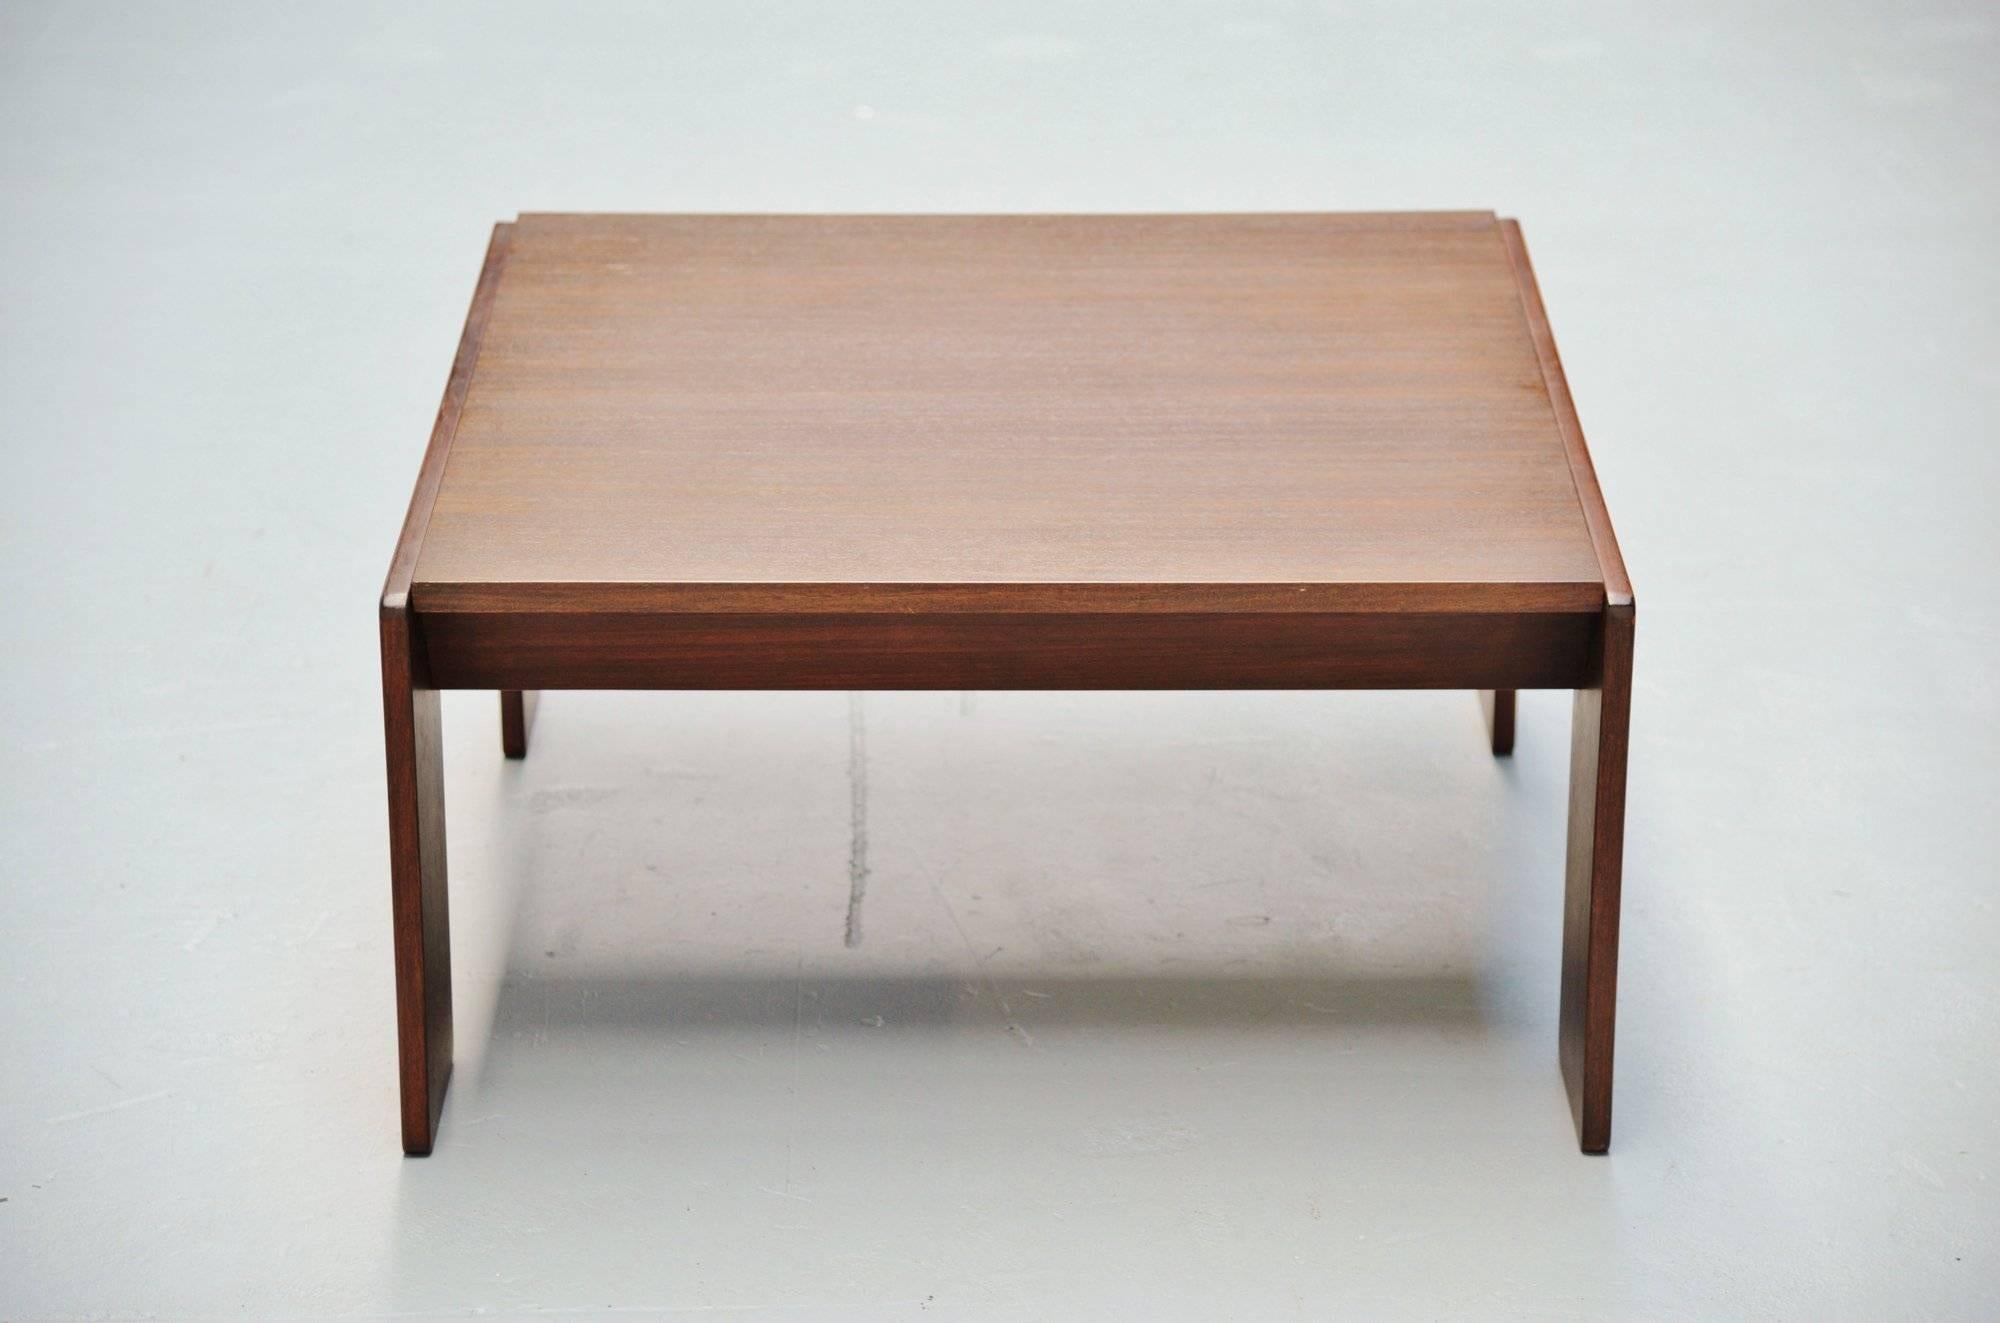 Rare Bastiano coffee table designed by Afra e Tobia Scarpa, manufactured by Gavina Italy 1968. The table is great to match with a Bastiano sofa or chairs, as this table is very hard to find. The table is in excellent original condition with hardly